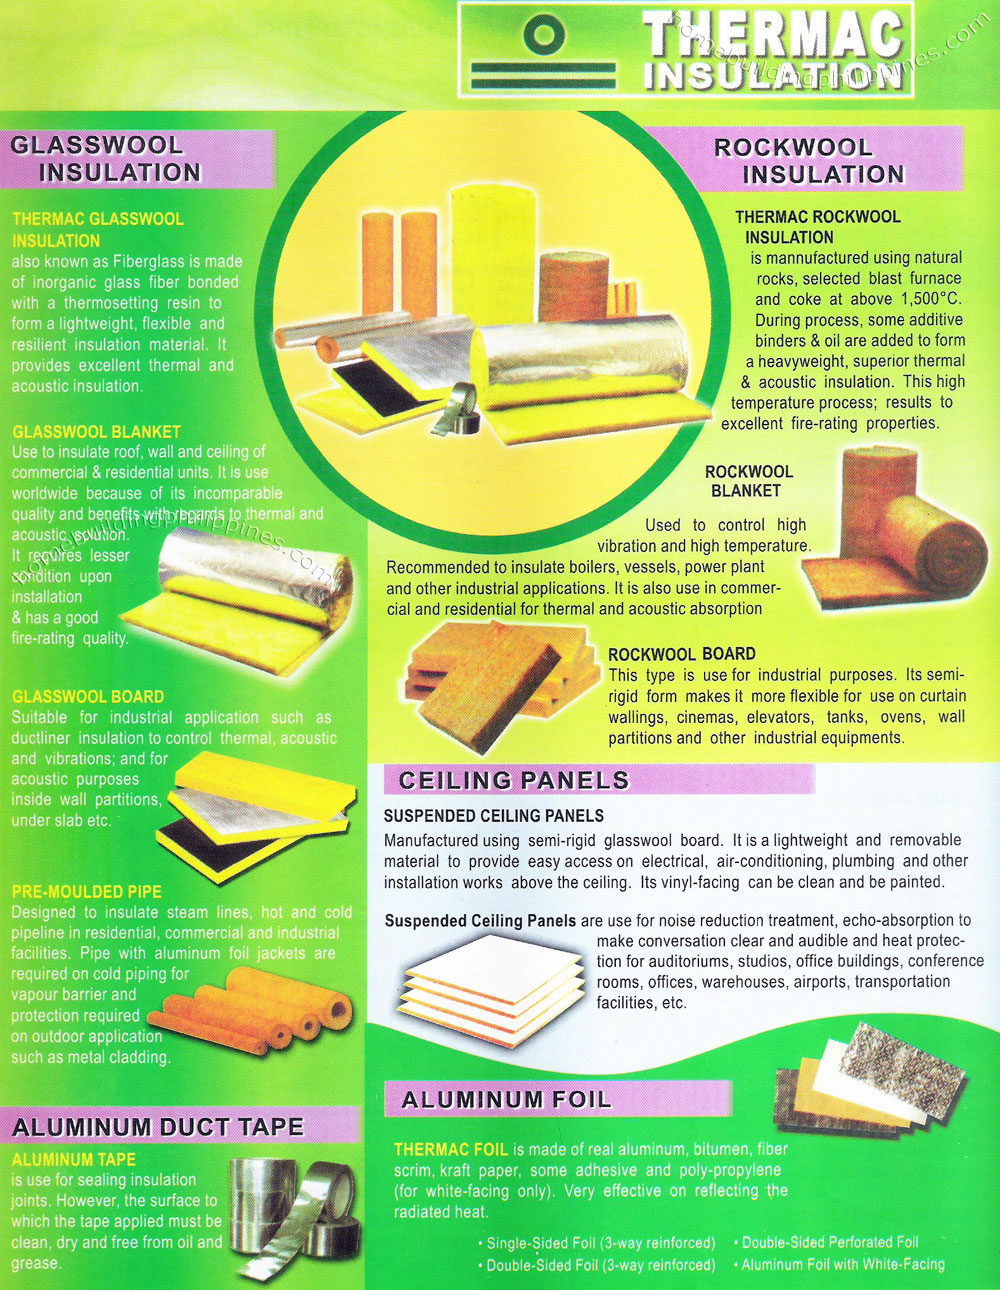 Glasswool Insulation Rockwool Insulation Ceiling Panels